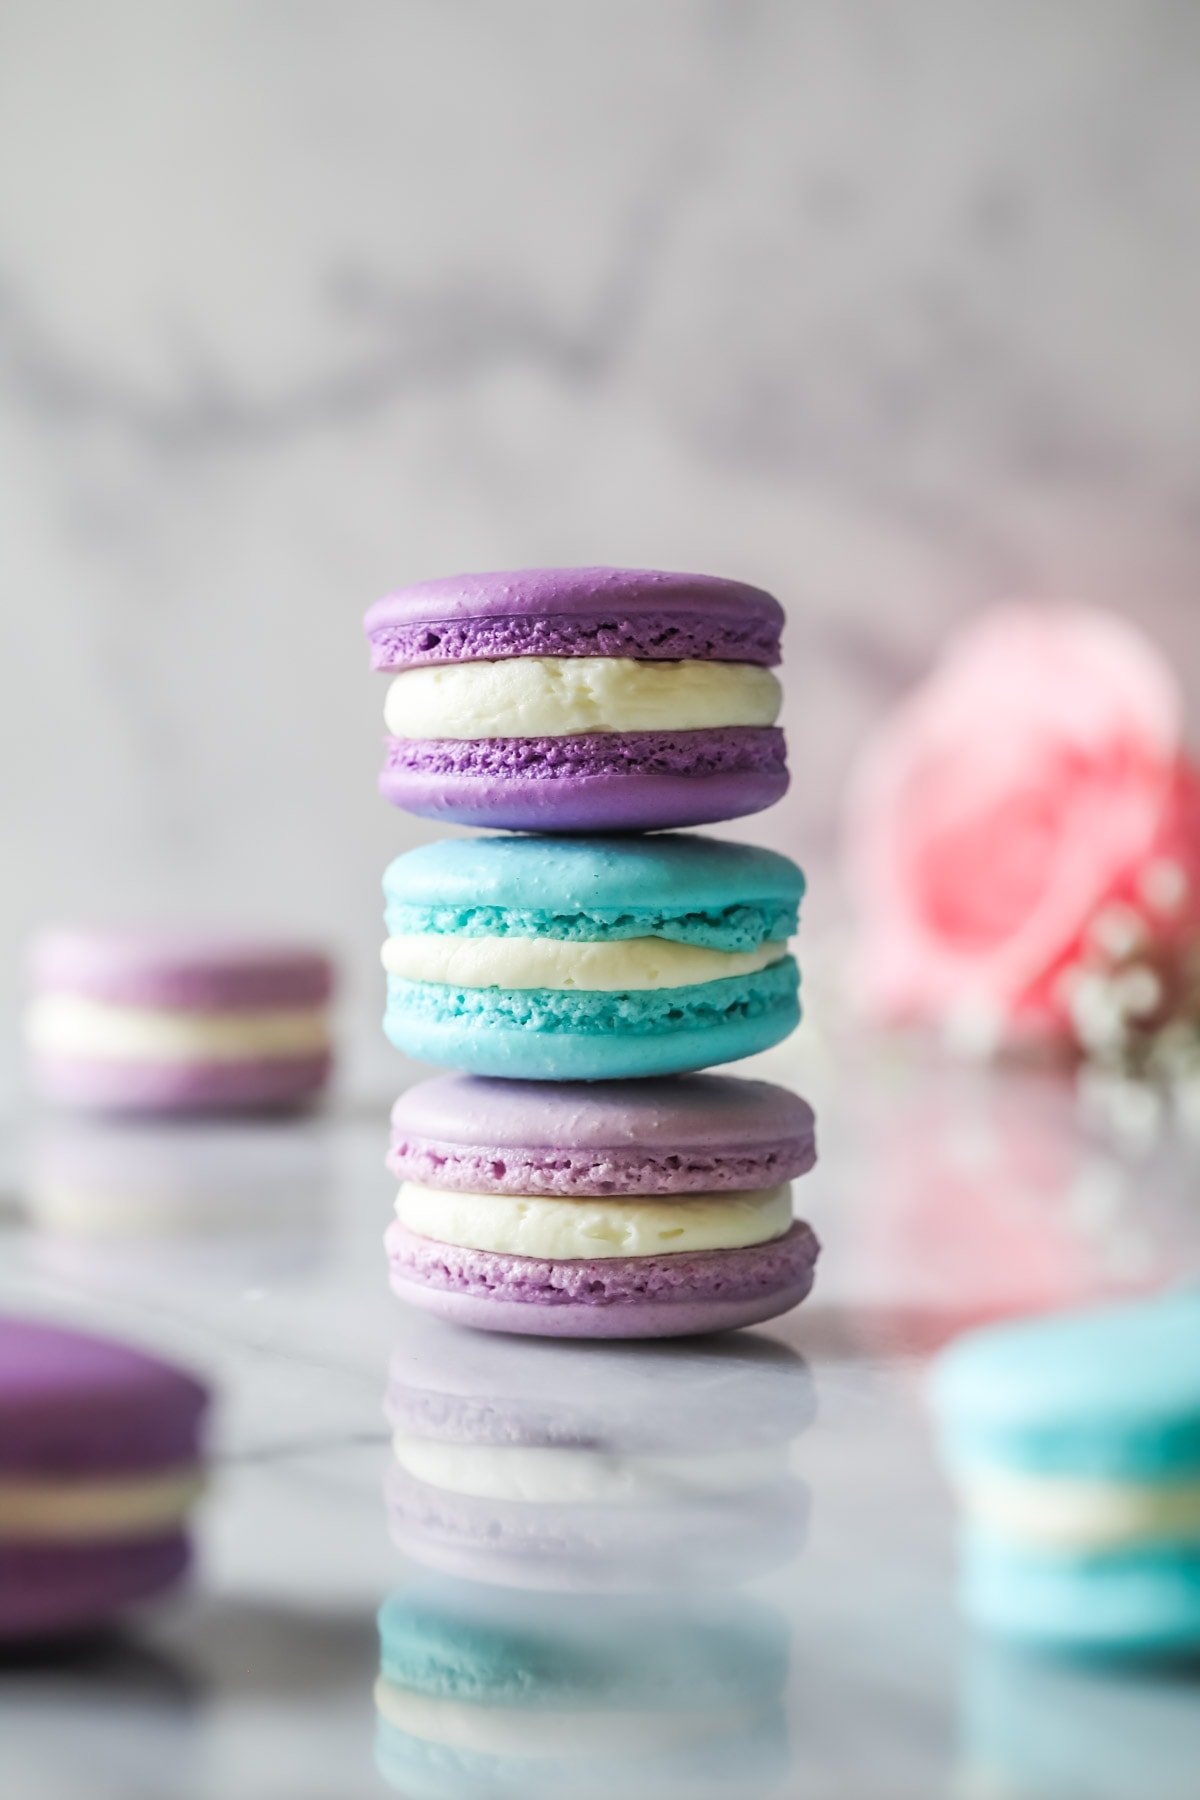 Three French macarons of different colors stacked on top of each other